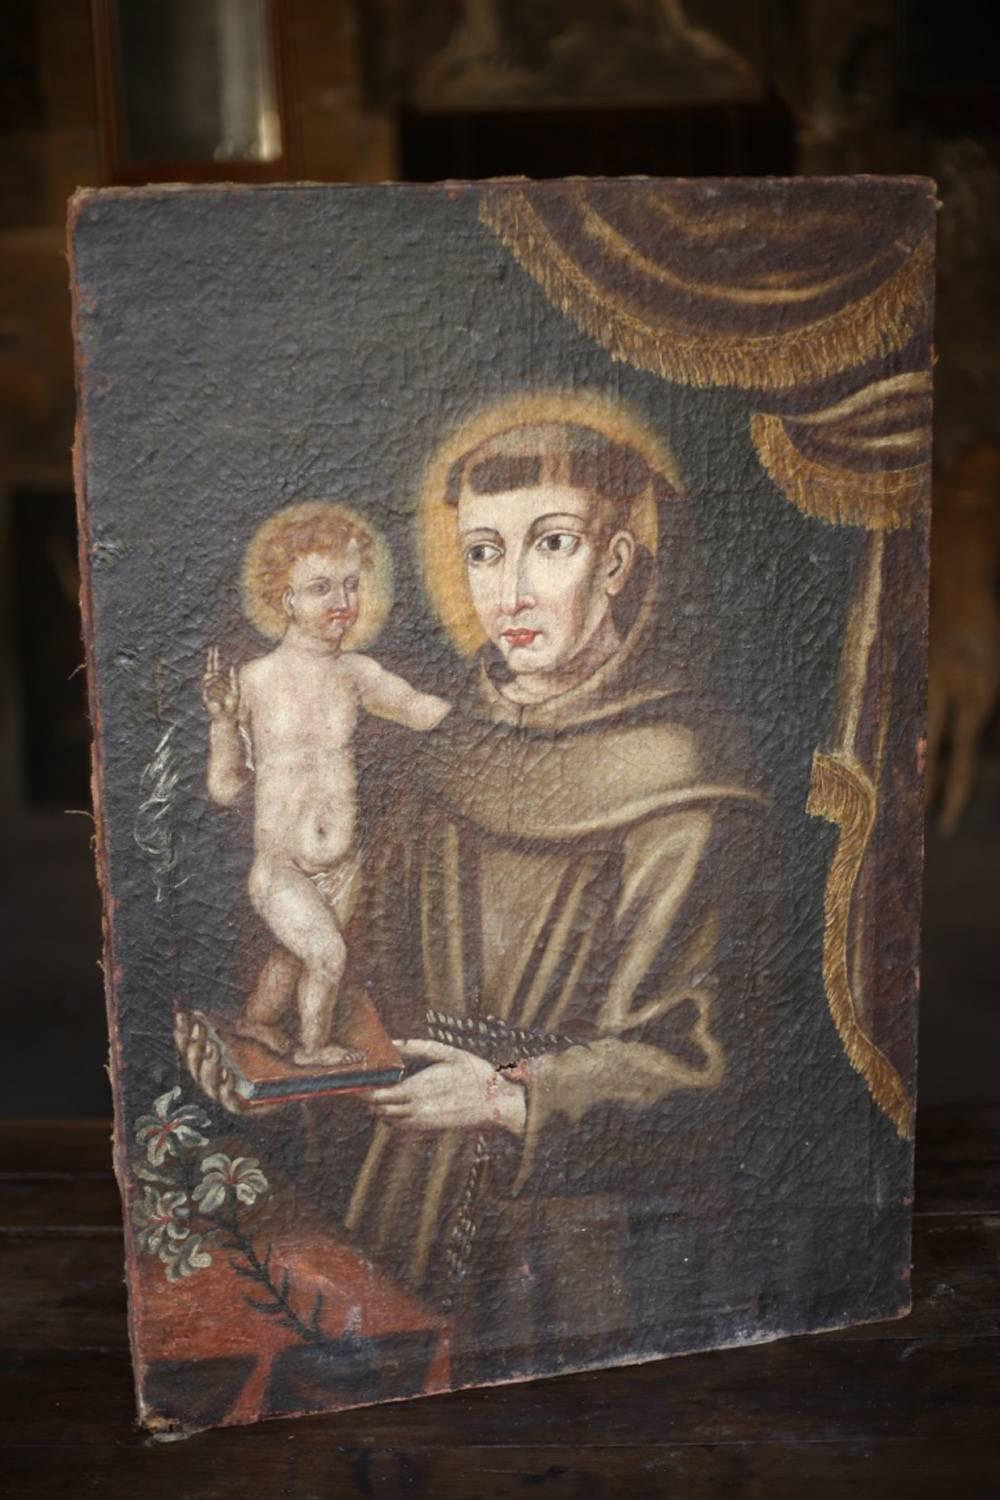 This is a extremely nice 18th century oil on canvas painting of St Dominic holding the bible with a icon figure standing on top of it. I believe the icon figure is that of a baby Jesus. St Dominic who's followers are known as the Dominicans was